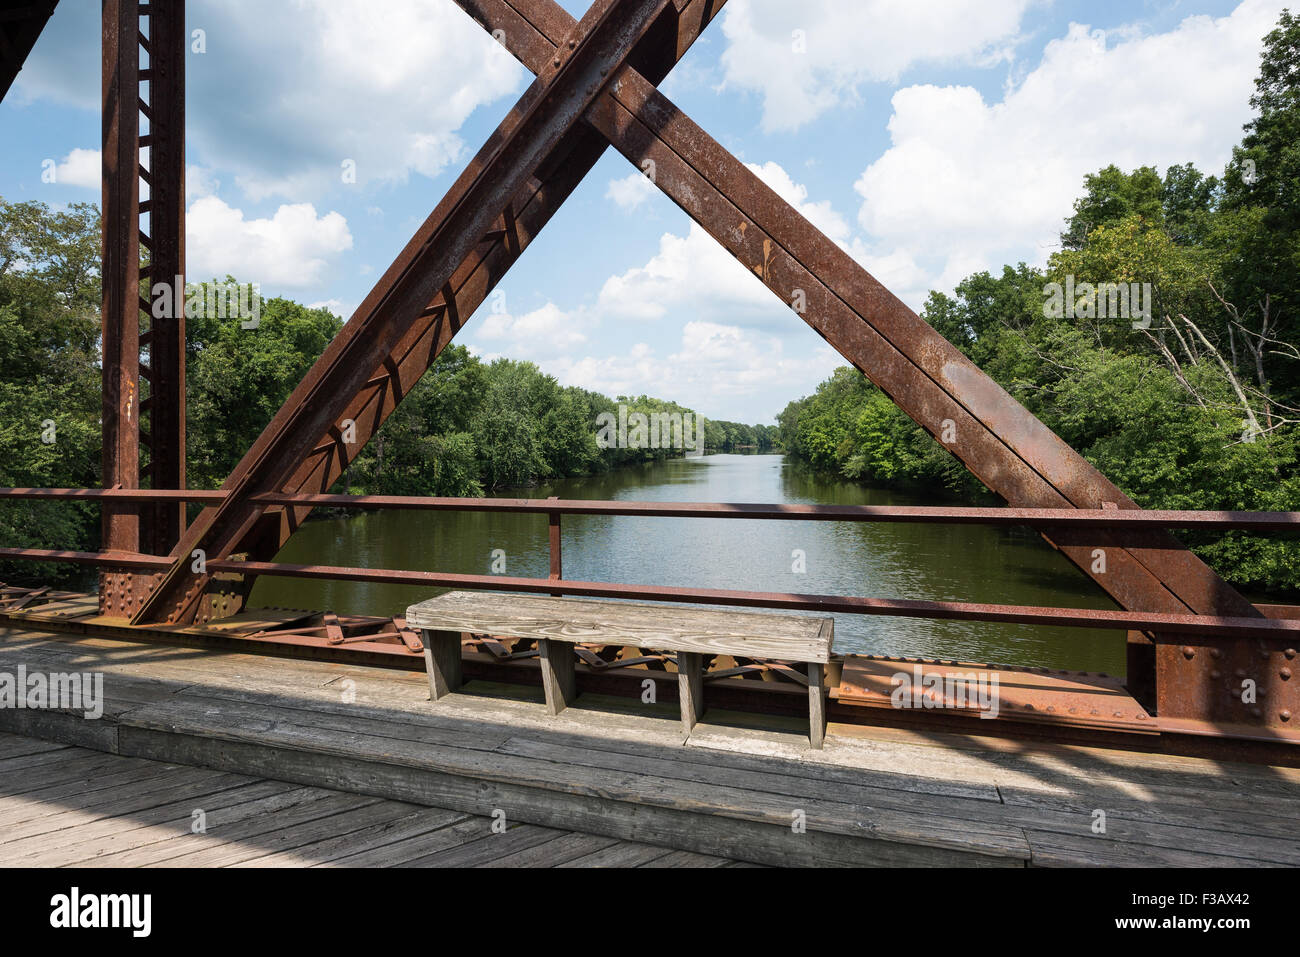 Bench on the Wallkill River Rail Trail Bridge in the Catskills, New York with a view of the river through the bridge structure. Stock Photo